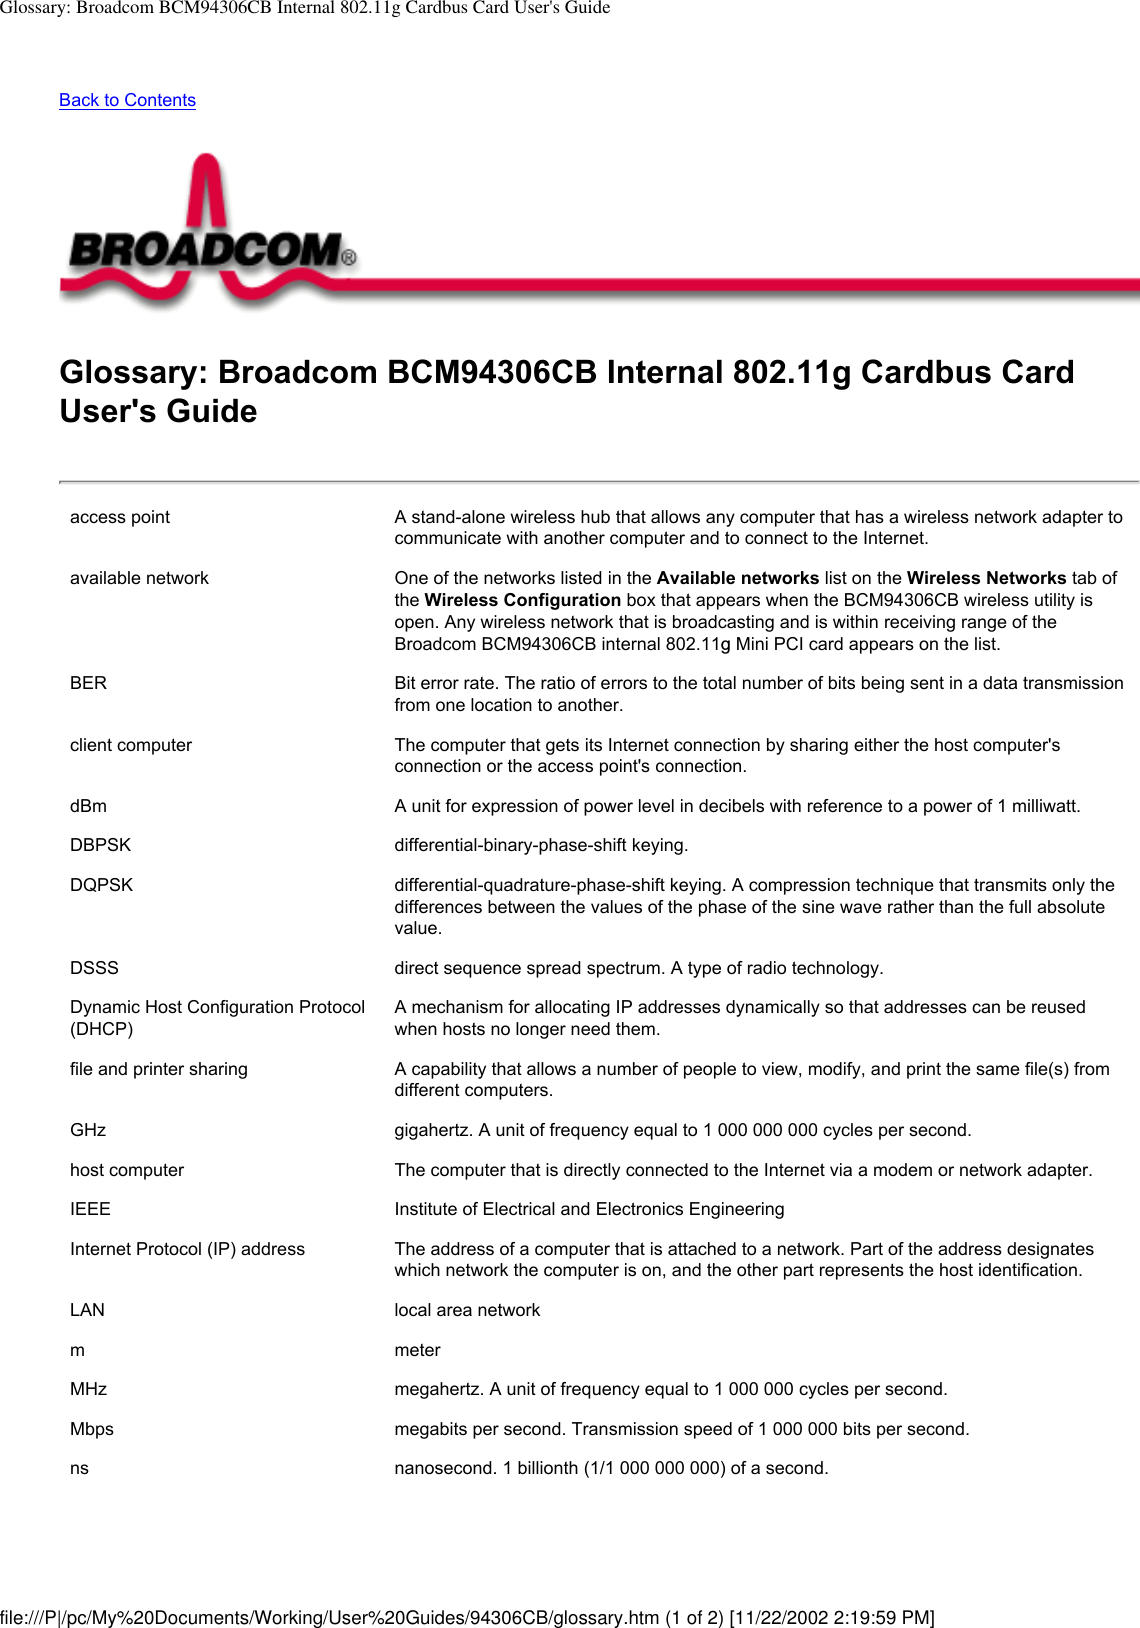 Glossary: Broadcom BCM94306CB Internal 802.11g Cardbus Card User&apos;s GuideBack to Contents Glossary: Broadcom BCM94306CB Internal 802.11g Cardbus Card User&apos;s Guideaccess point A stand-alone wireless hub that allows any computer that has a wireless network adapter to communicate with another computer and to connect to the Internet. available network One of the networks listed in the Available networks list on the Wireless Networks tab of the Wireless Configuration box that appears when the BCM94306CB wireless utility is open. Any wireless network that is broadcasting and is within receiving range of the Broadcom BCM94306CB internal 802.11g Mini PCI card appears on the list.BER Bit error rate. The ratio of errors to the total number of bits being sent in a data transmission from one location to another.client computer The computer that gets its Internet connection by sharing either the host computer&apos;s connection or the access point&apos;s connection.dBm A unit for expression of power level in decibels with reference to a power of 1 milliwatt.DBPSK differential-binary-phase-shift keying.DQPSK differential-quadrature-phase-shift keying. A compression technique that transmits only the differences between the values of the phase of the sine wave rather than the full absolute value.DSSS direct sequence spread spectrum. A type of radio technology.Dynamic Host Configuration Protocol (DHCP) A mechanism for allocating IP addresses dynamically so that addresses can be reused when hosts no longer need them.file and printer sharing A capability that allows a number of people to view, modify, and print the same file(s) from different computers.GHz gigahertz. A unit of frequency equal to 1 000 000 000 cycles per second. host computer The computer that is directly connected to the Internet via a modem or network adapter.IEEE Institute of Electrical and Electronics EngineeringInternet Protocol (IP) address The address of a computer that is attached to a network. Part of the address designates which network the computer is on, and the other part represents the host identification.LAN local area networkm meterMHz megahertz. A unit of frequency equal to 1 000 000 cycles per second.Mbps megabits per second. Transmission speed of 1 000 000 bits per second.ns nanosecond. 1 billionth (1/1 000 000 000) of a second.file:///P|/pc/My%20Documents/Working/User%20Guides/94306CB/glossary.htm (1 of 2) [11/22/2002 2:19:59 PM]